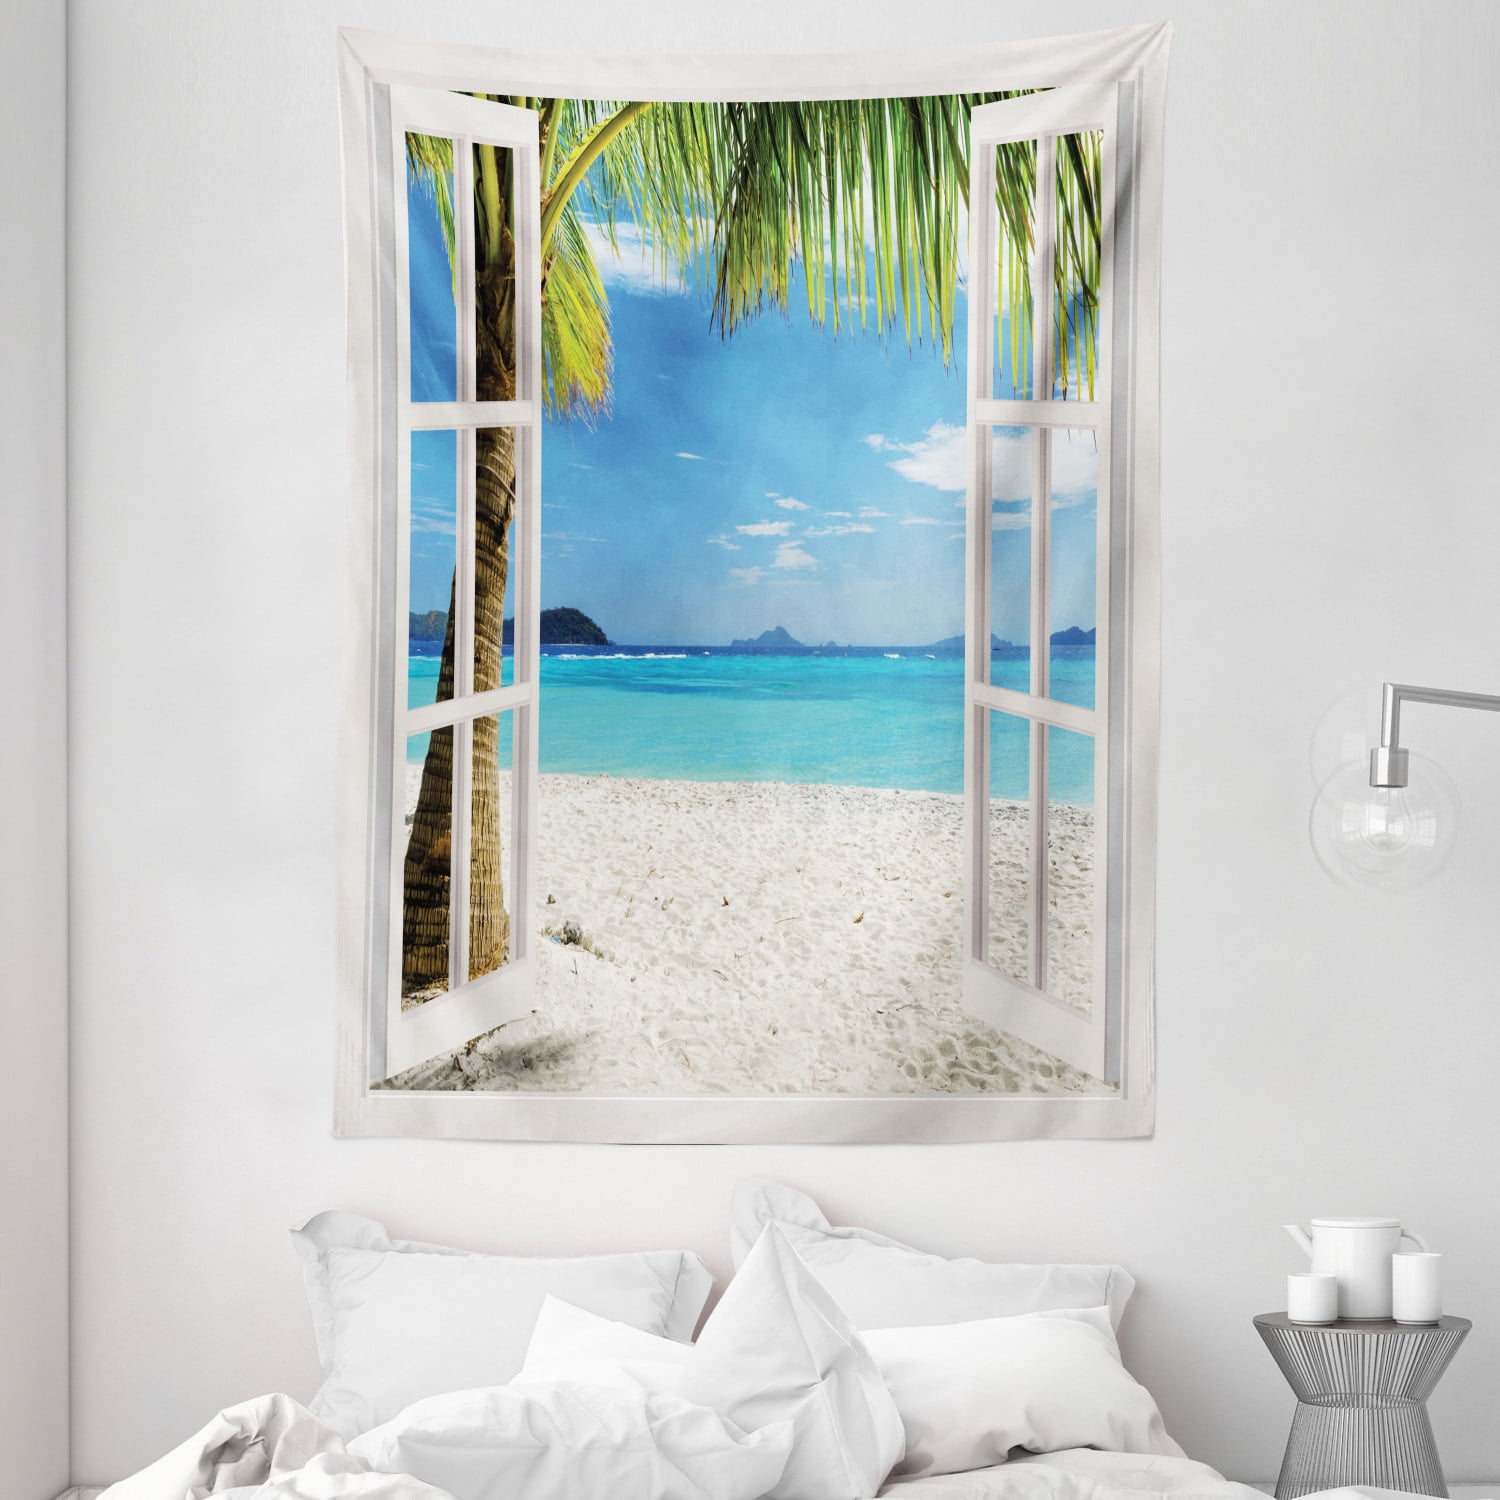 Tropical Beach Palm Sea Tapestry India Wall Art Hanging Tapestry Room Bedspread 